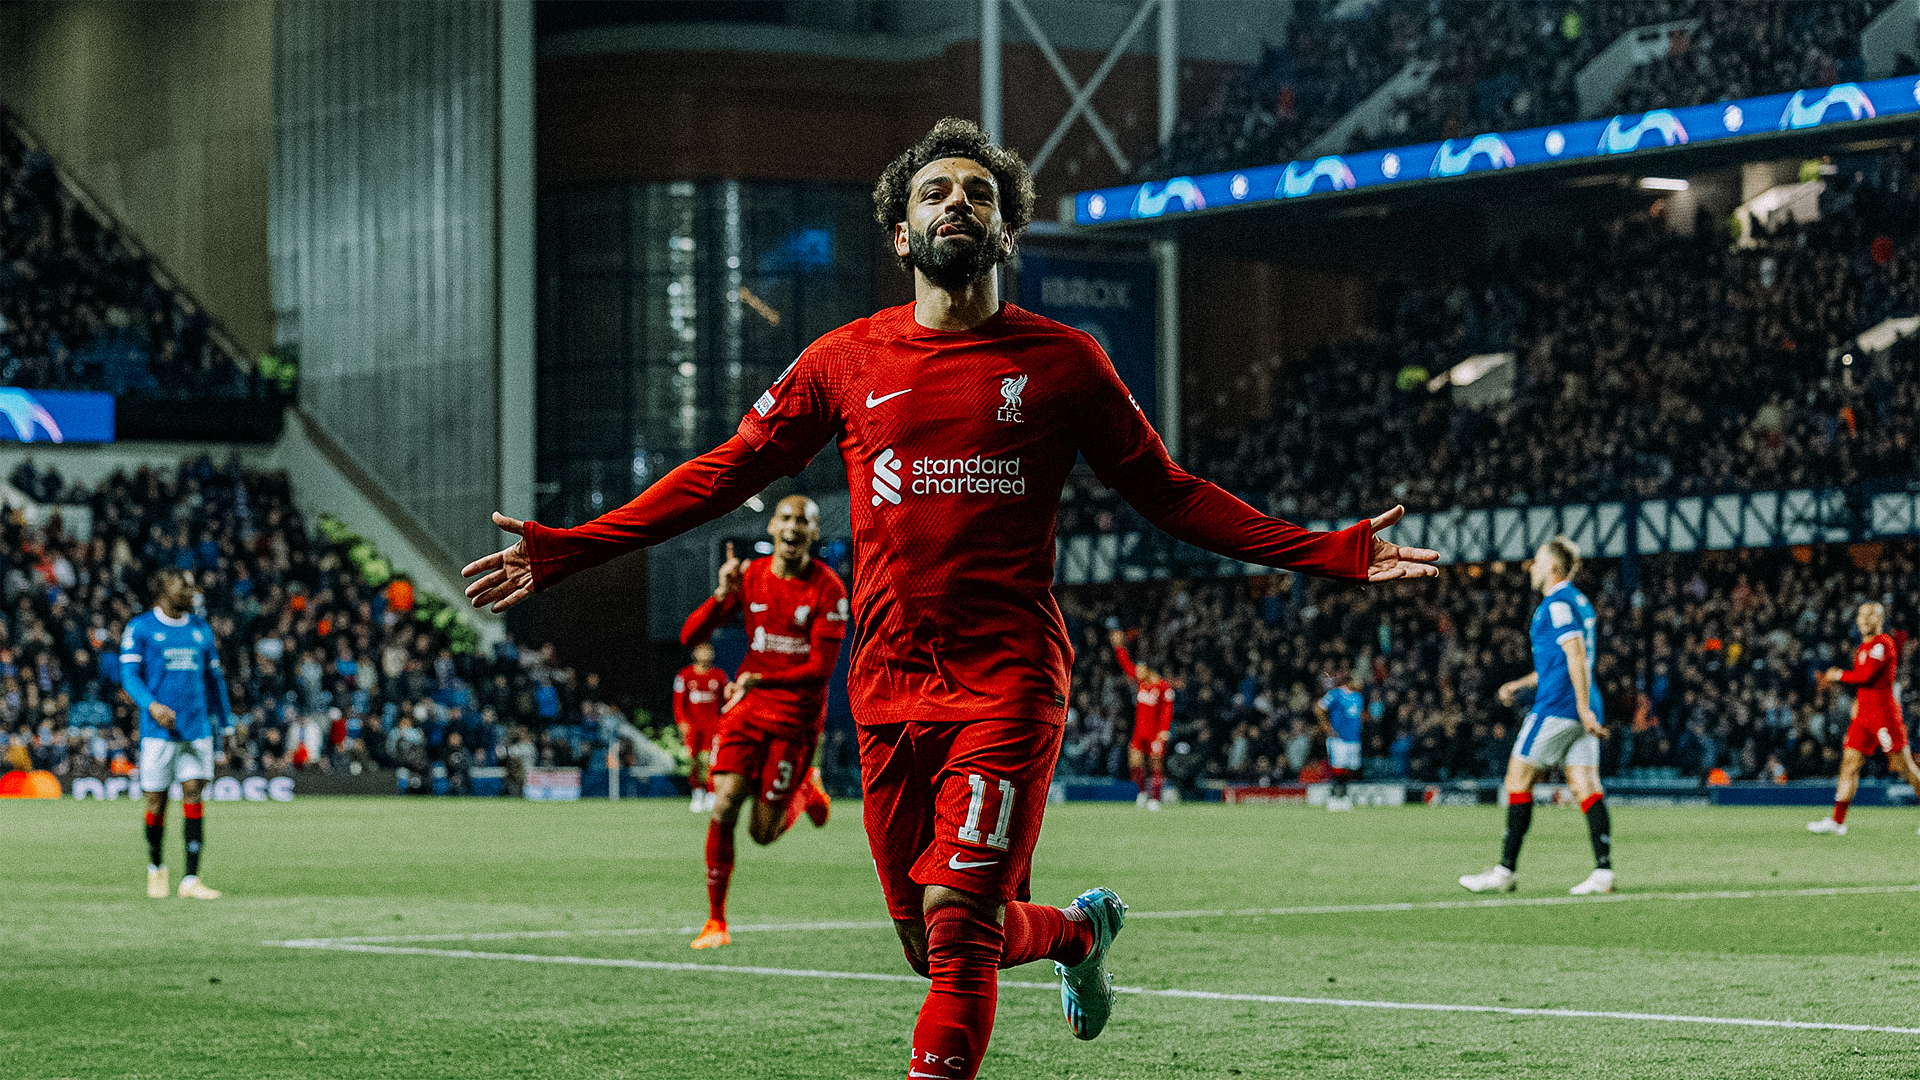 Liverpool FC — Salah hits record-breaking hat-trick as Reds rout Rangers  7-1 at Ibrox